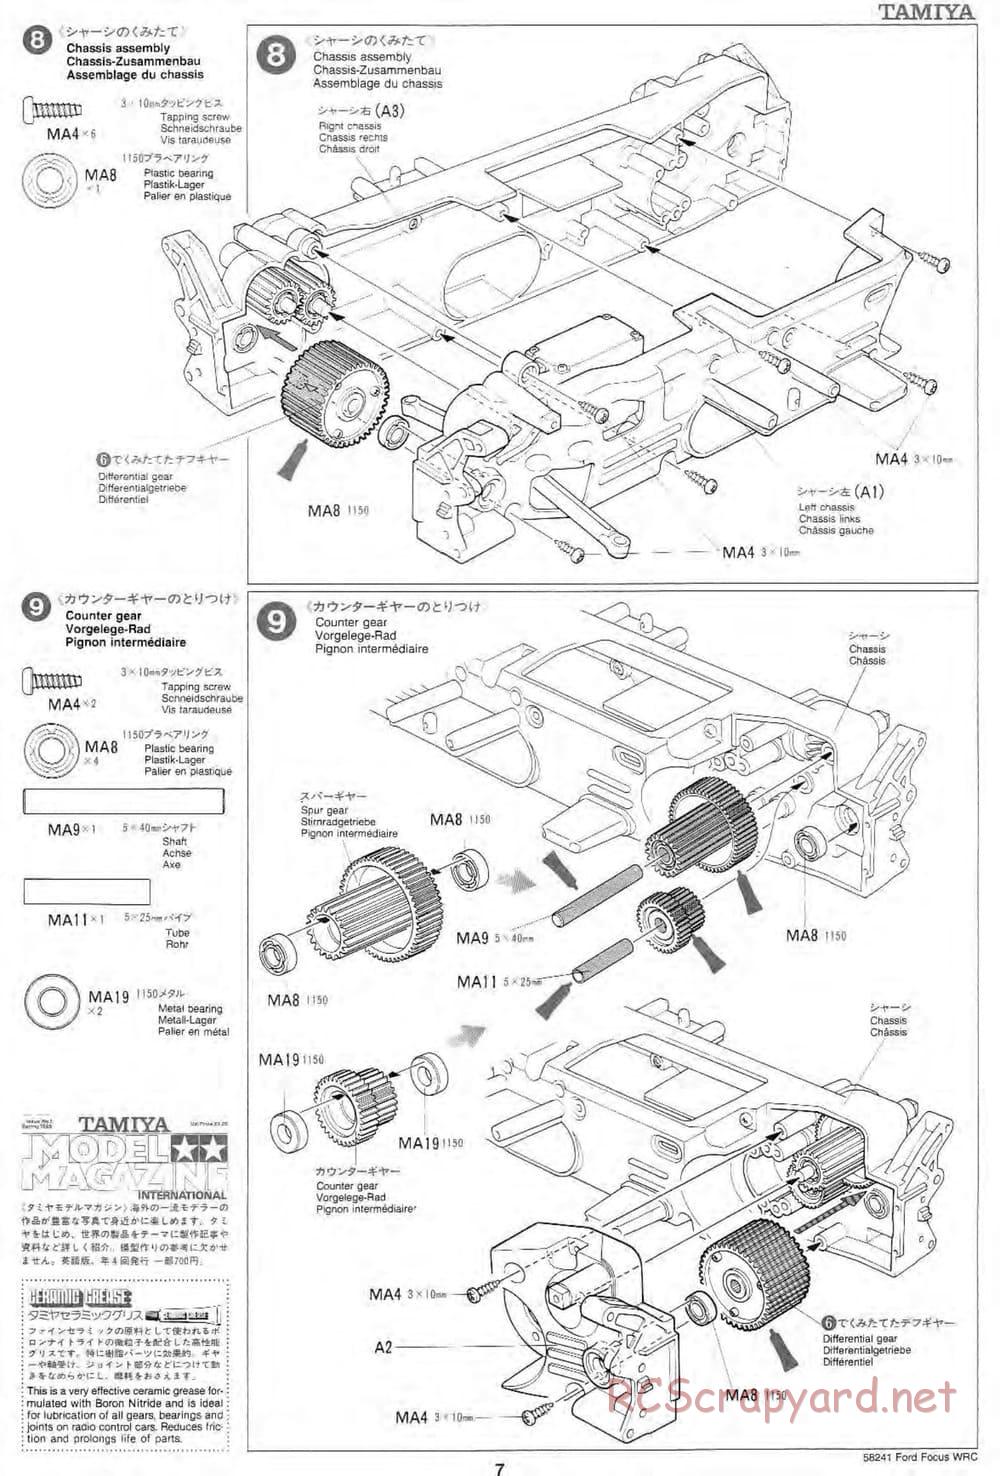 Tamiya - Ford Focus WRC - TL-01 Chassis - Manual - Page 7